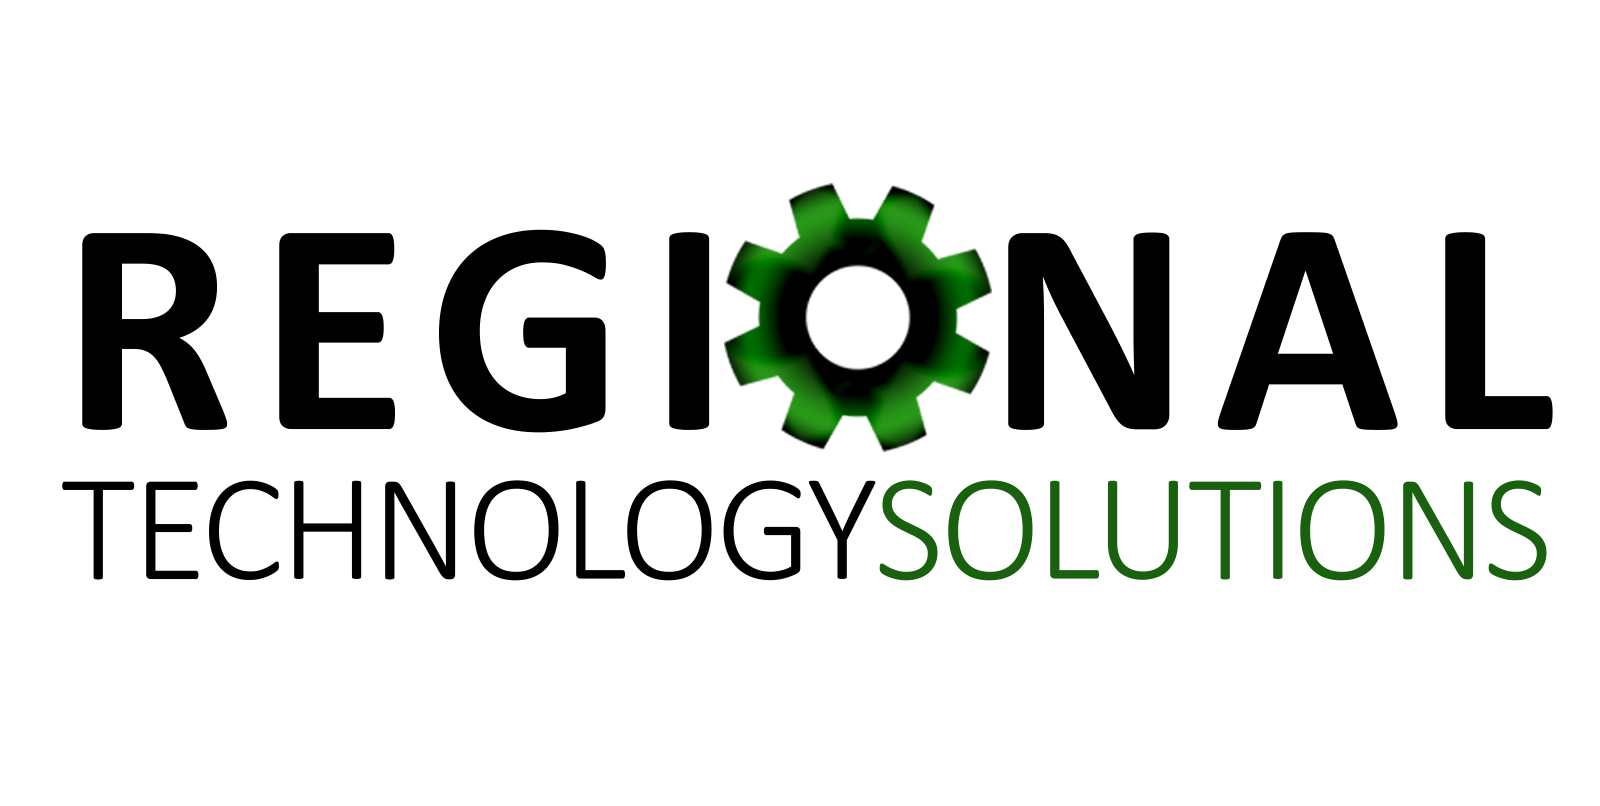 The logo for regional technology solutions has a green gear in the middle.